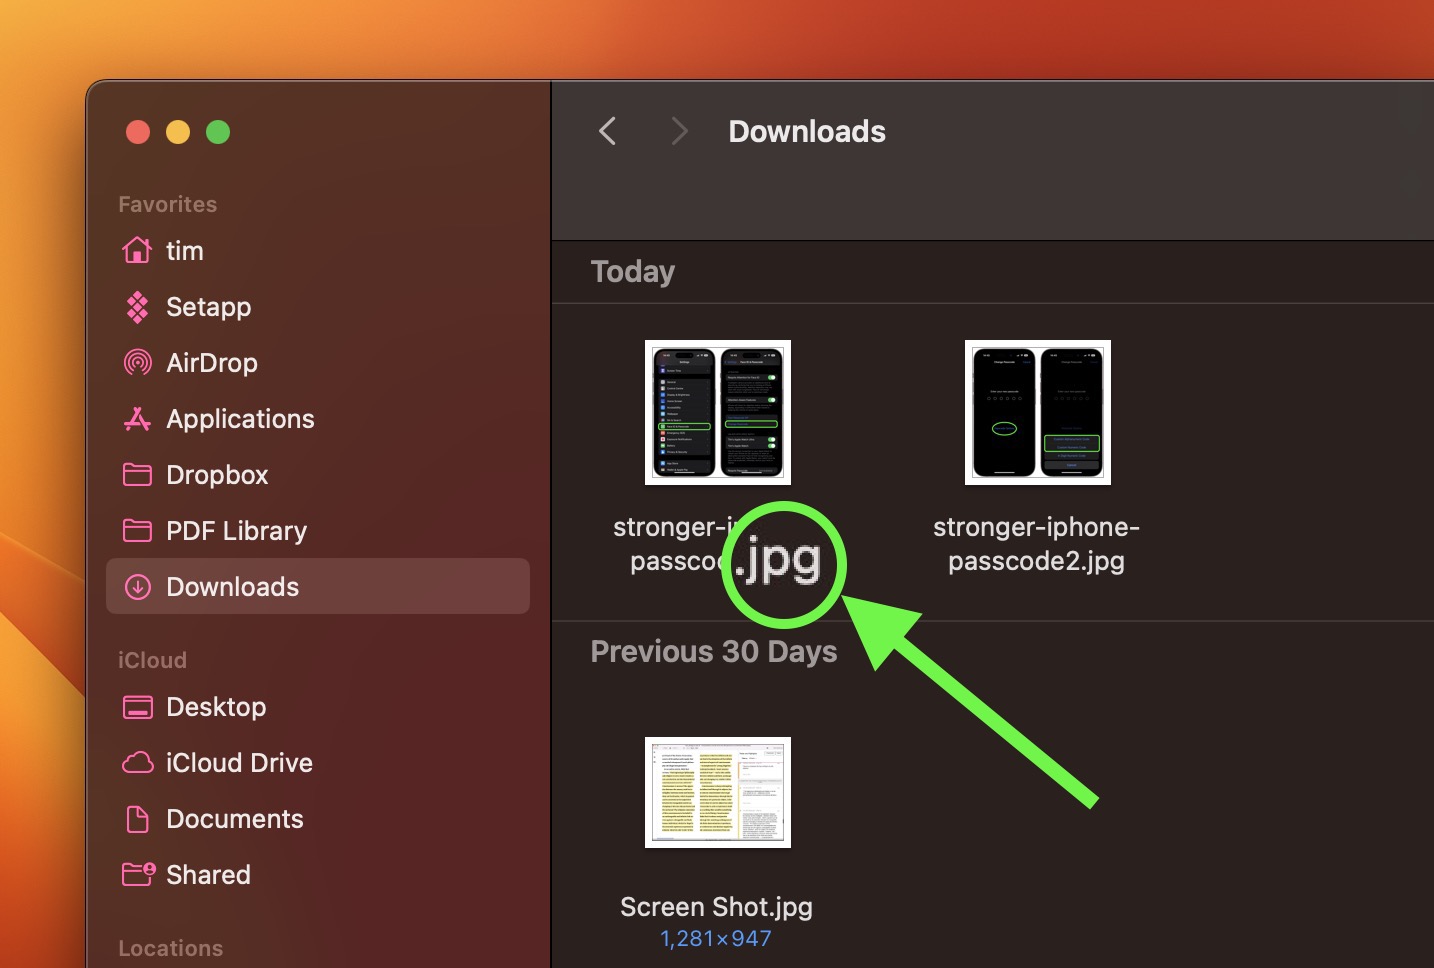 Show File Name Extensions in Mac OS X